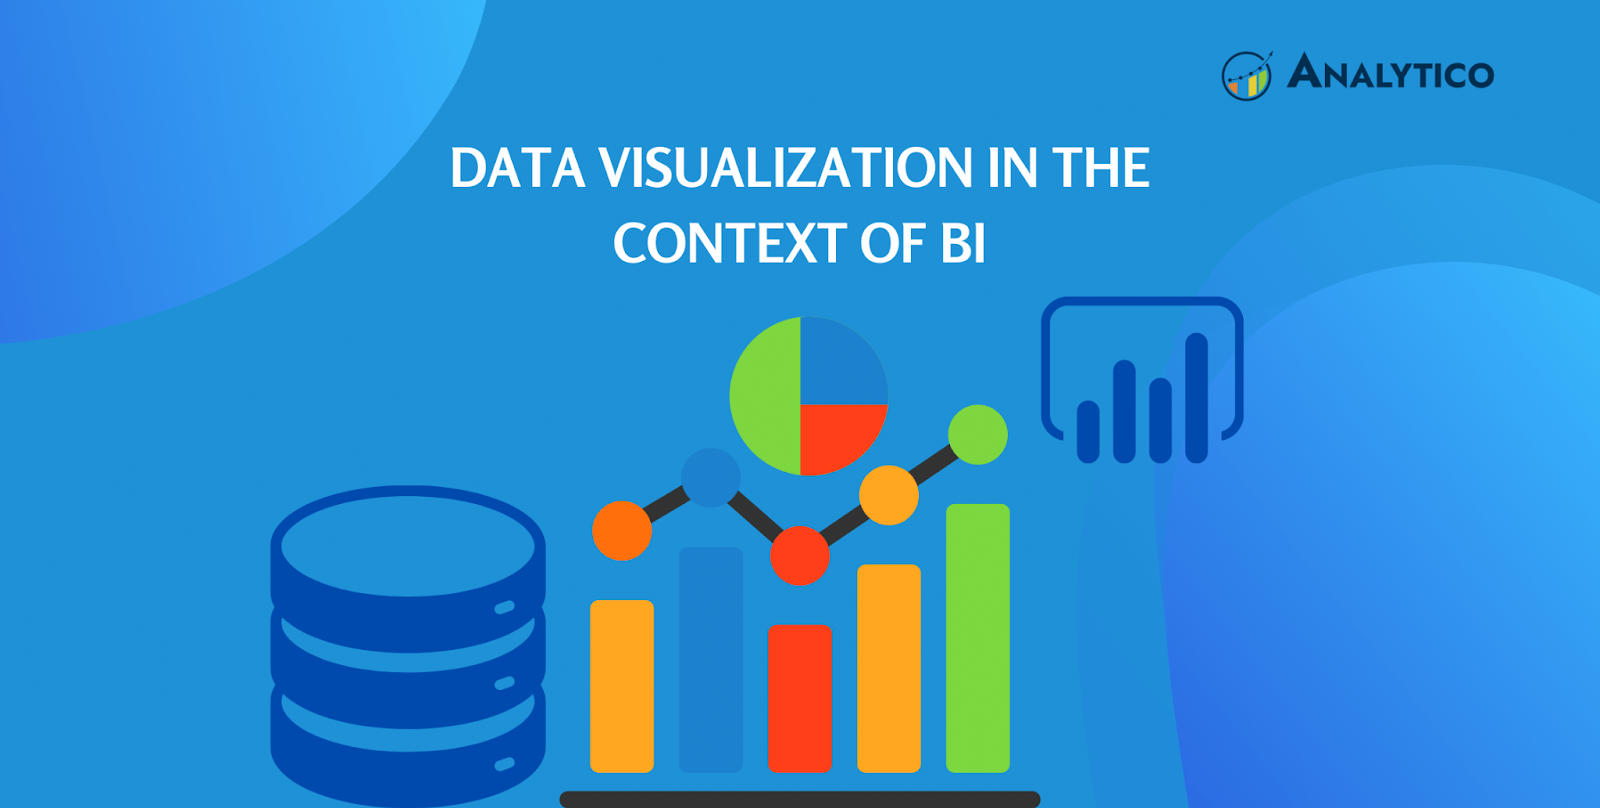 What is Data Visualization in the Context of BI